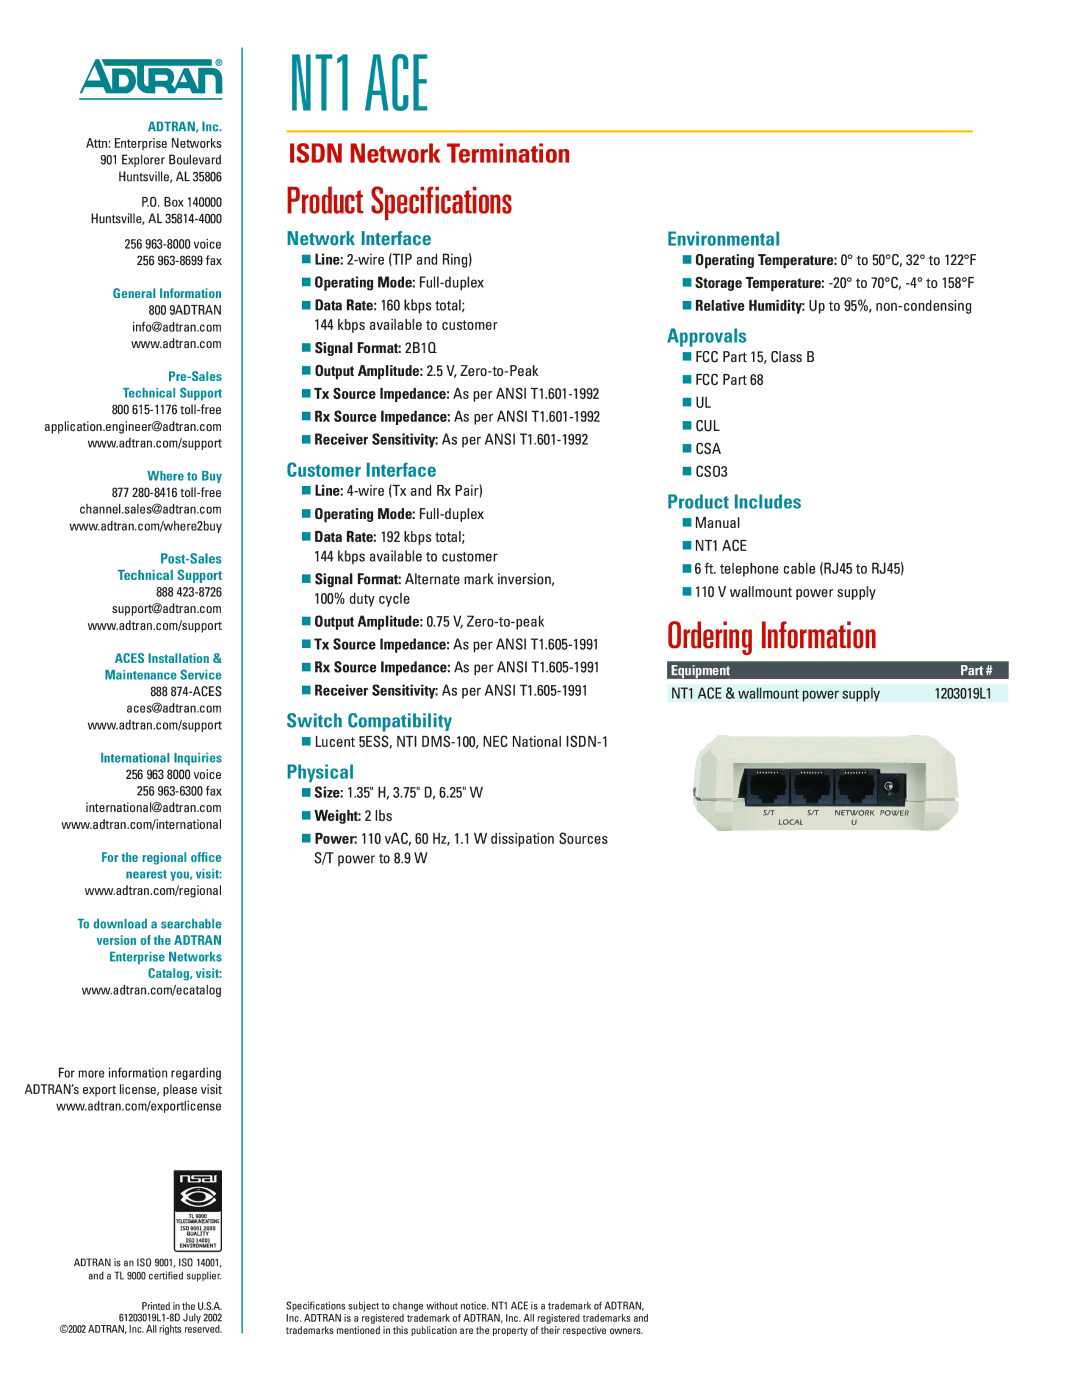 ADTRAN NT1 ACE warranty Product Specifications, Ordering Information 